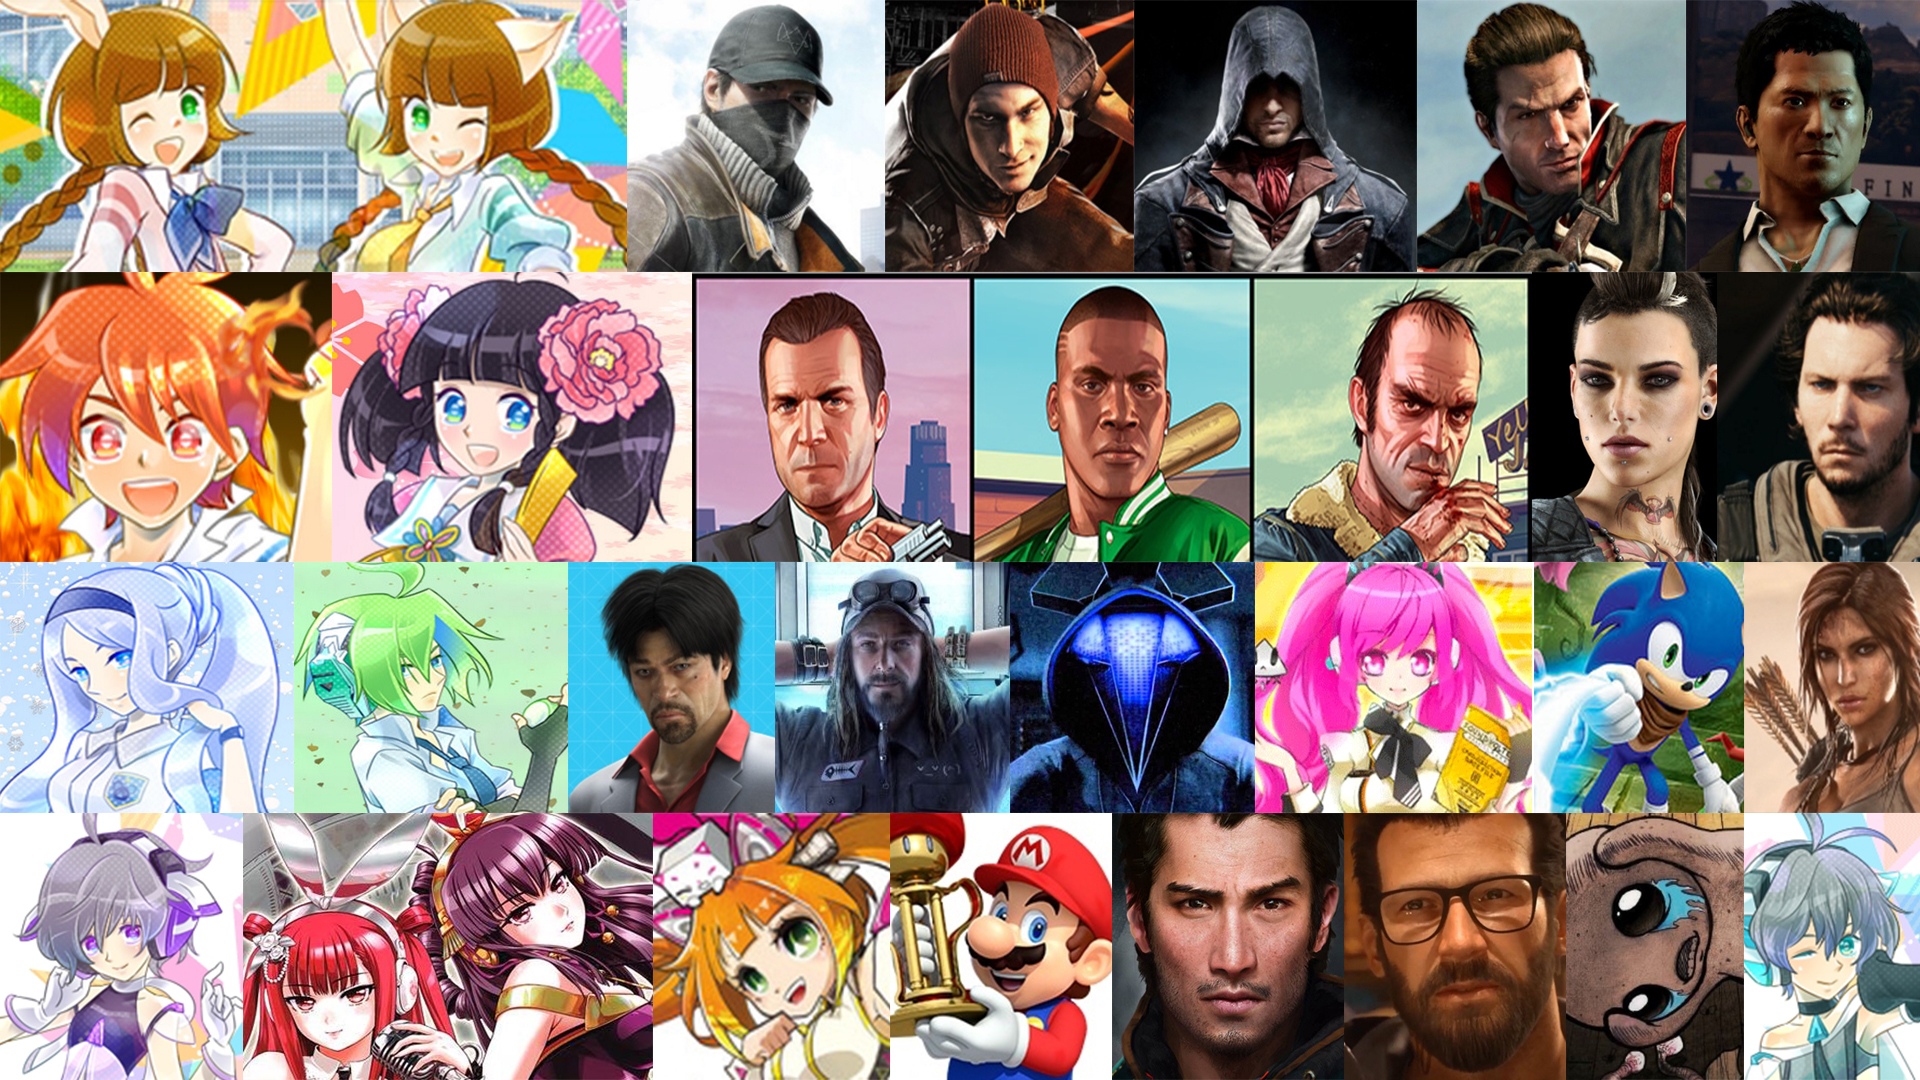 The 25 best video games of 2014, Games